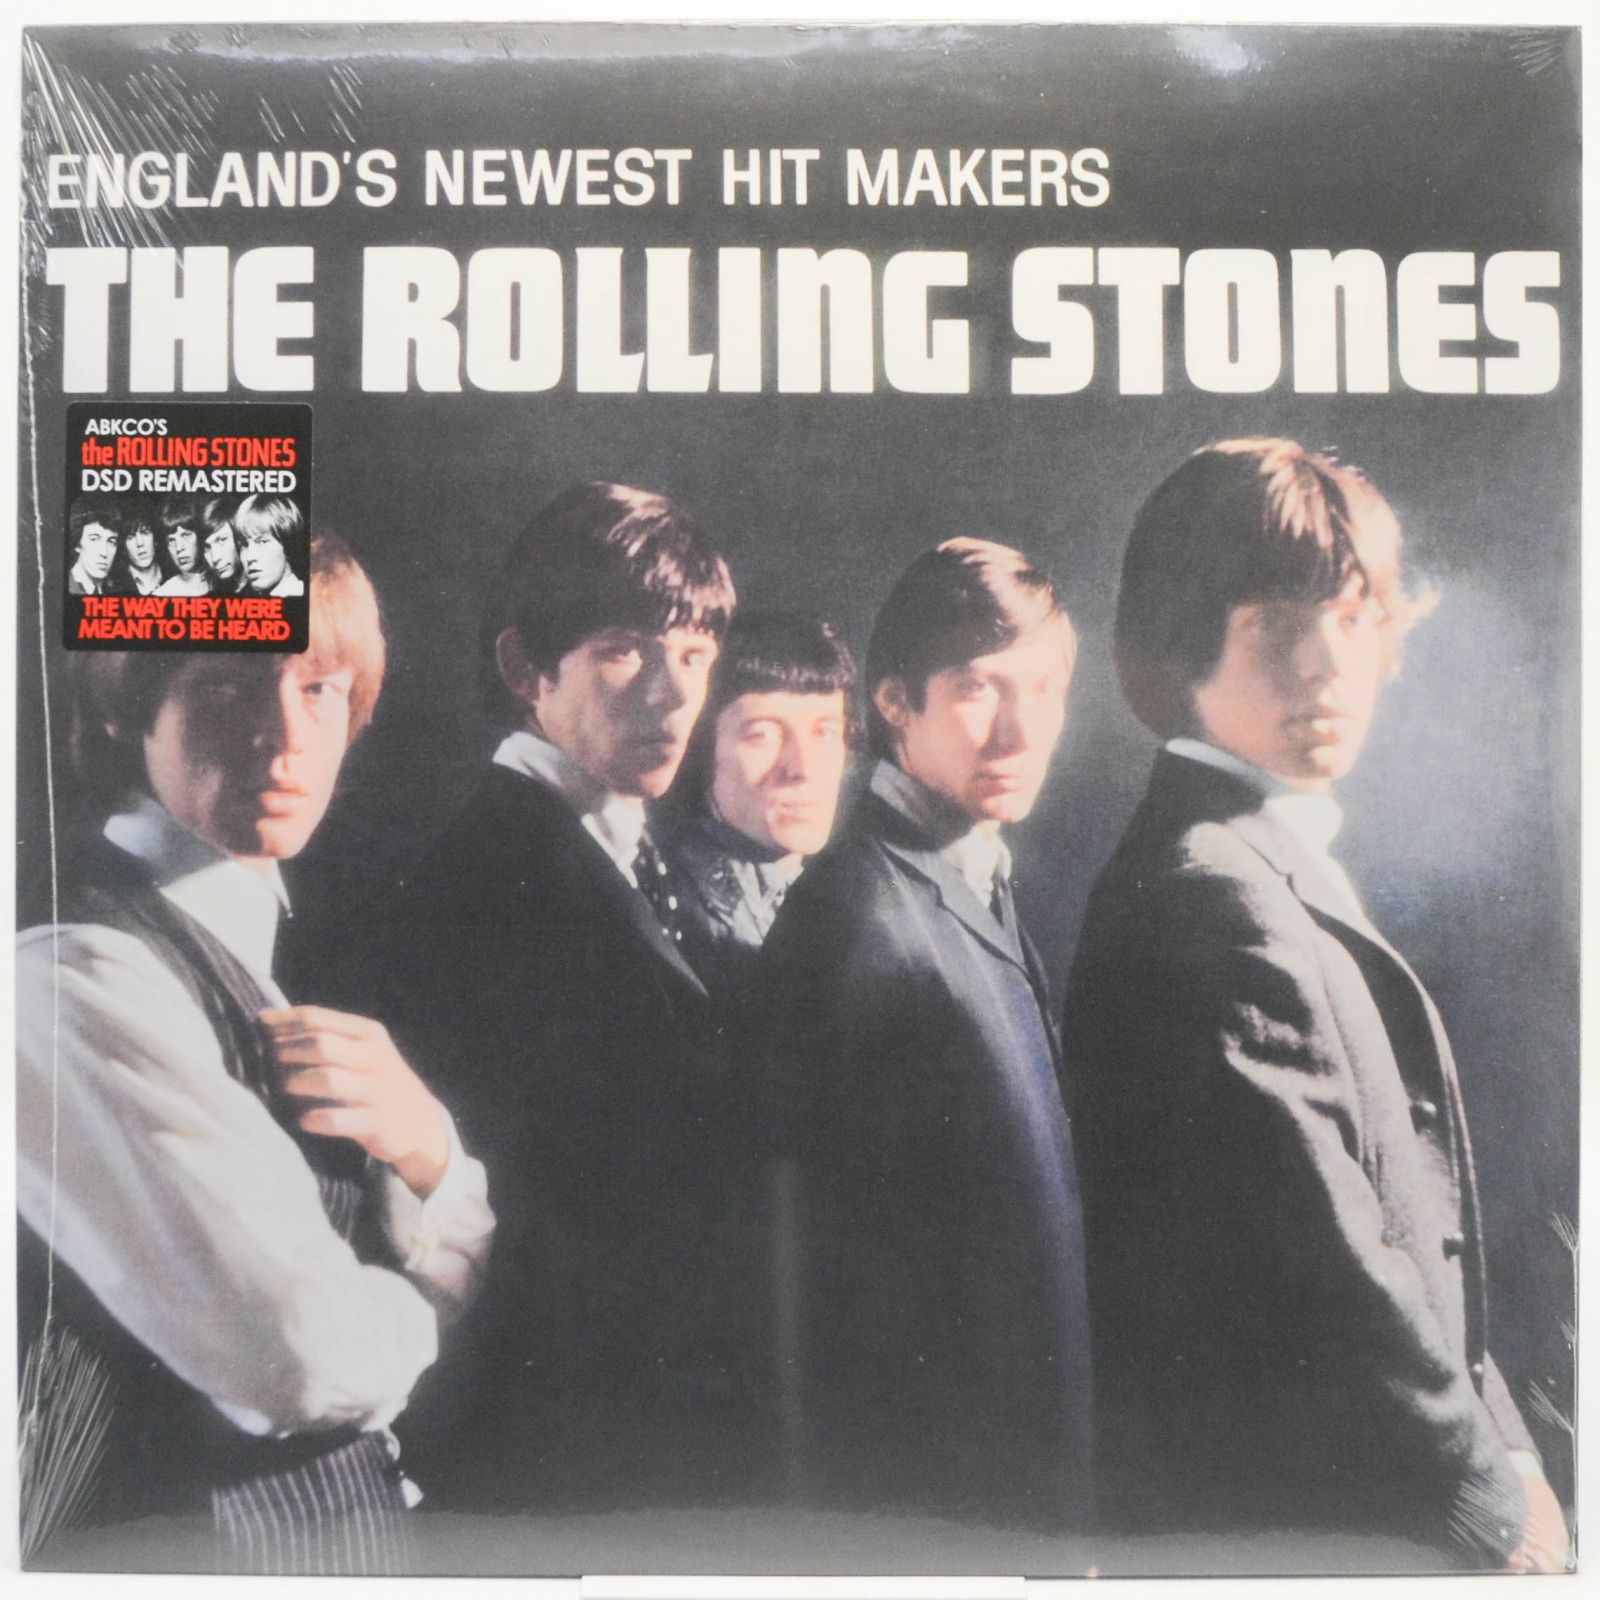 Rolling Stones — The Rolling Stones (England's Newest Hit Makers), 2003